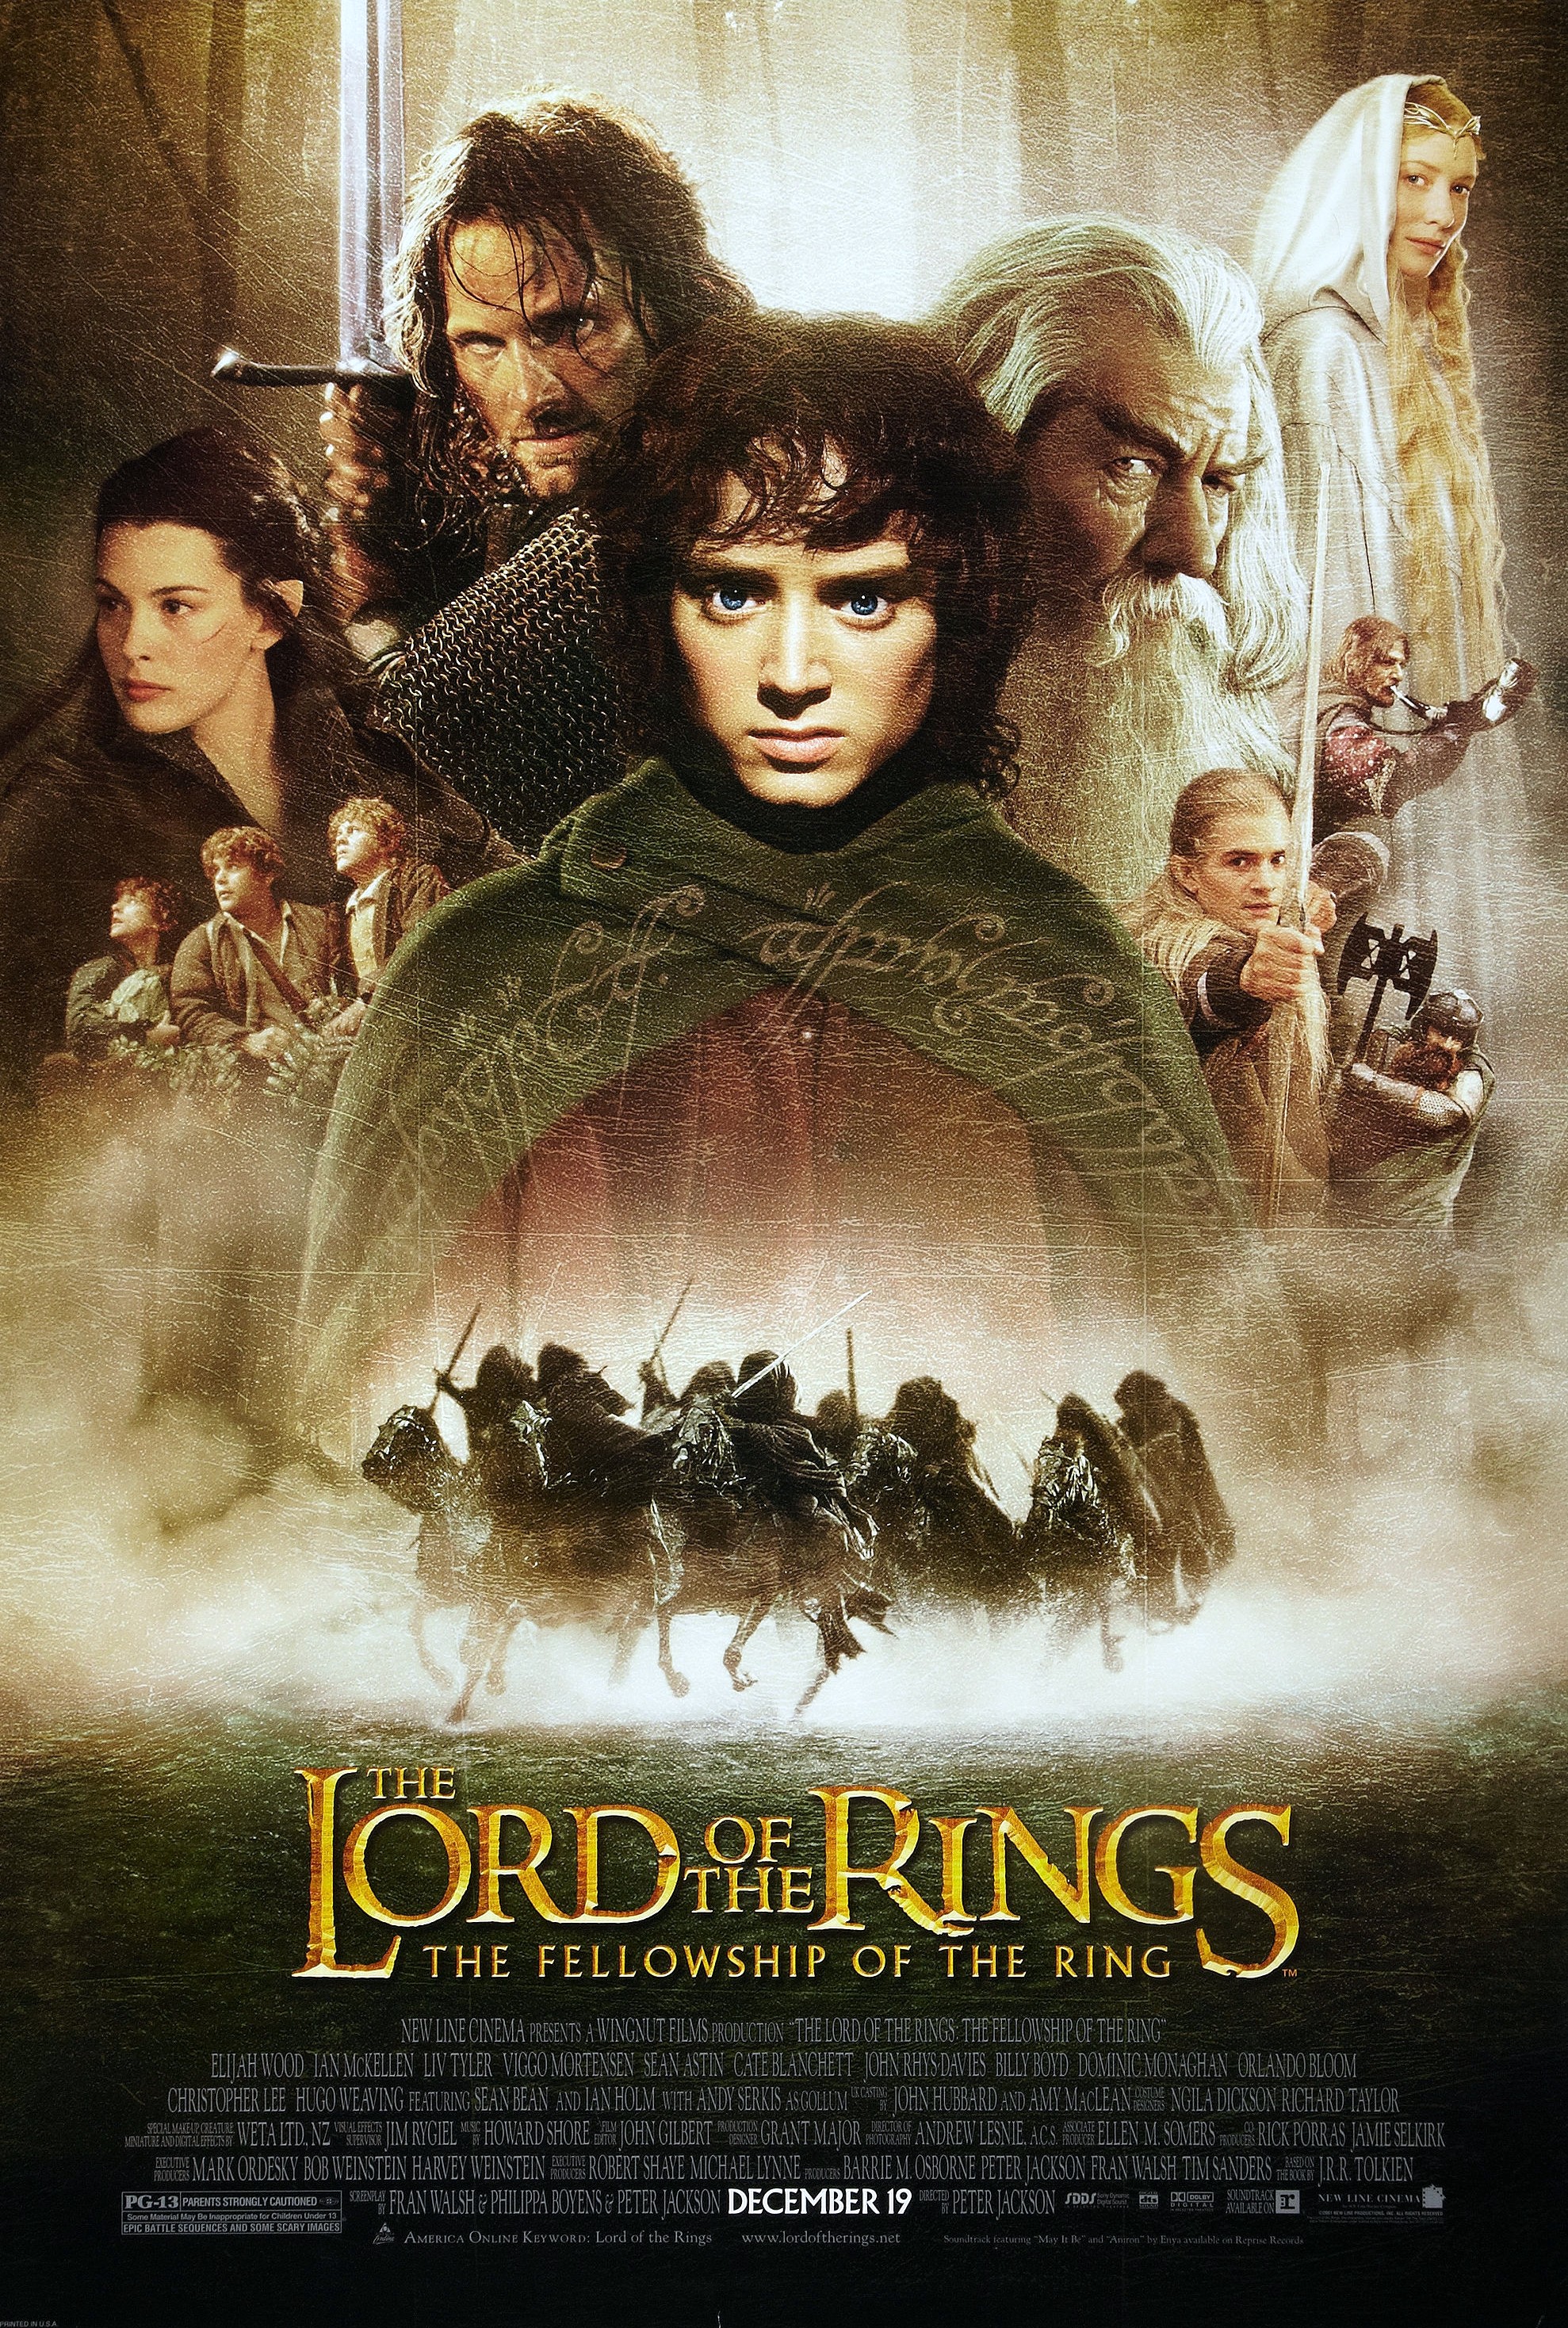 1 Film En 1 Minute The Lord Of The Rings The Fellowship Of The Ring De Peter Jackson Sad Pop Inc Depuis 06